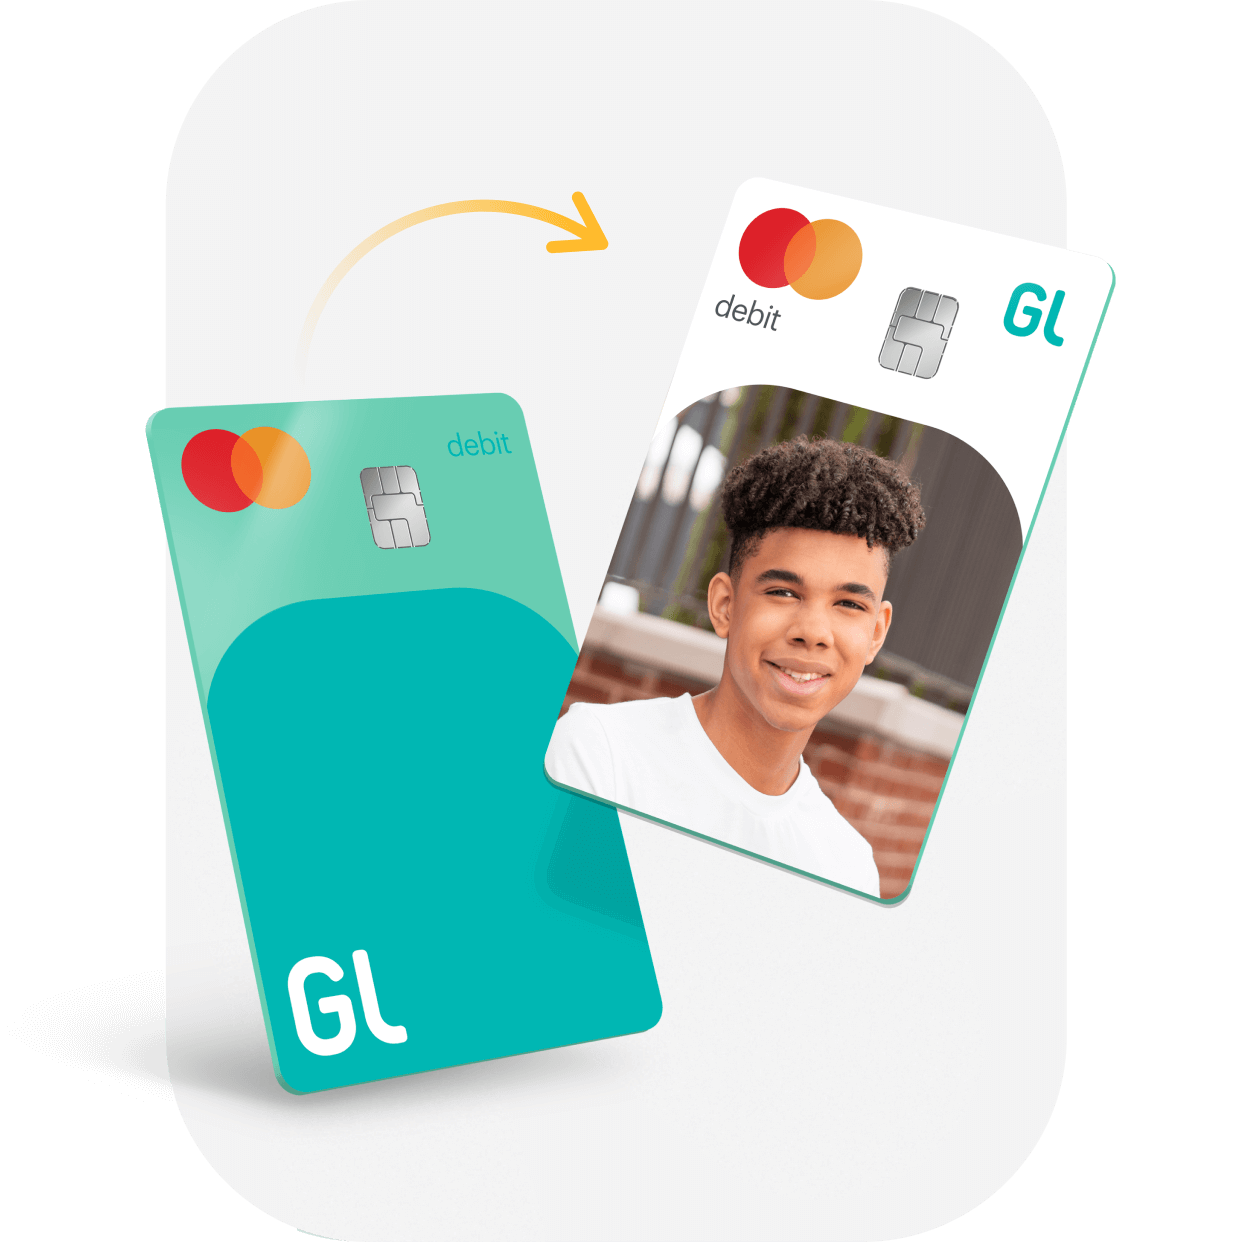 graphic showing greenlight debit card and a greenlight custom debit card with a teen boy face on it